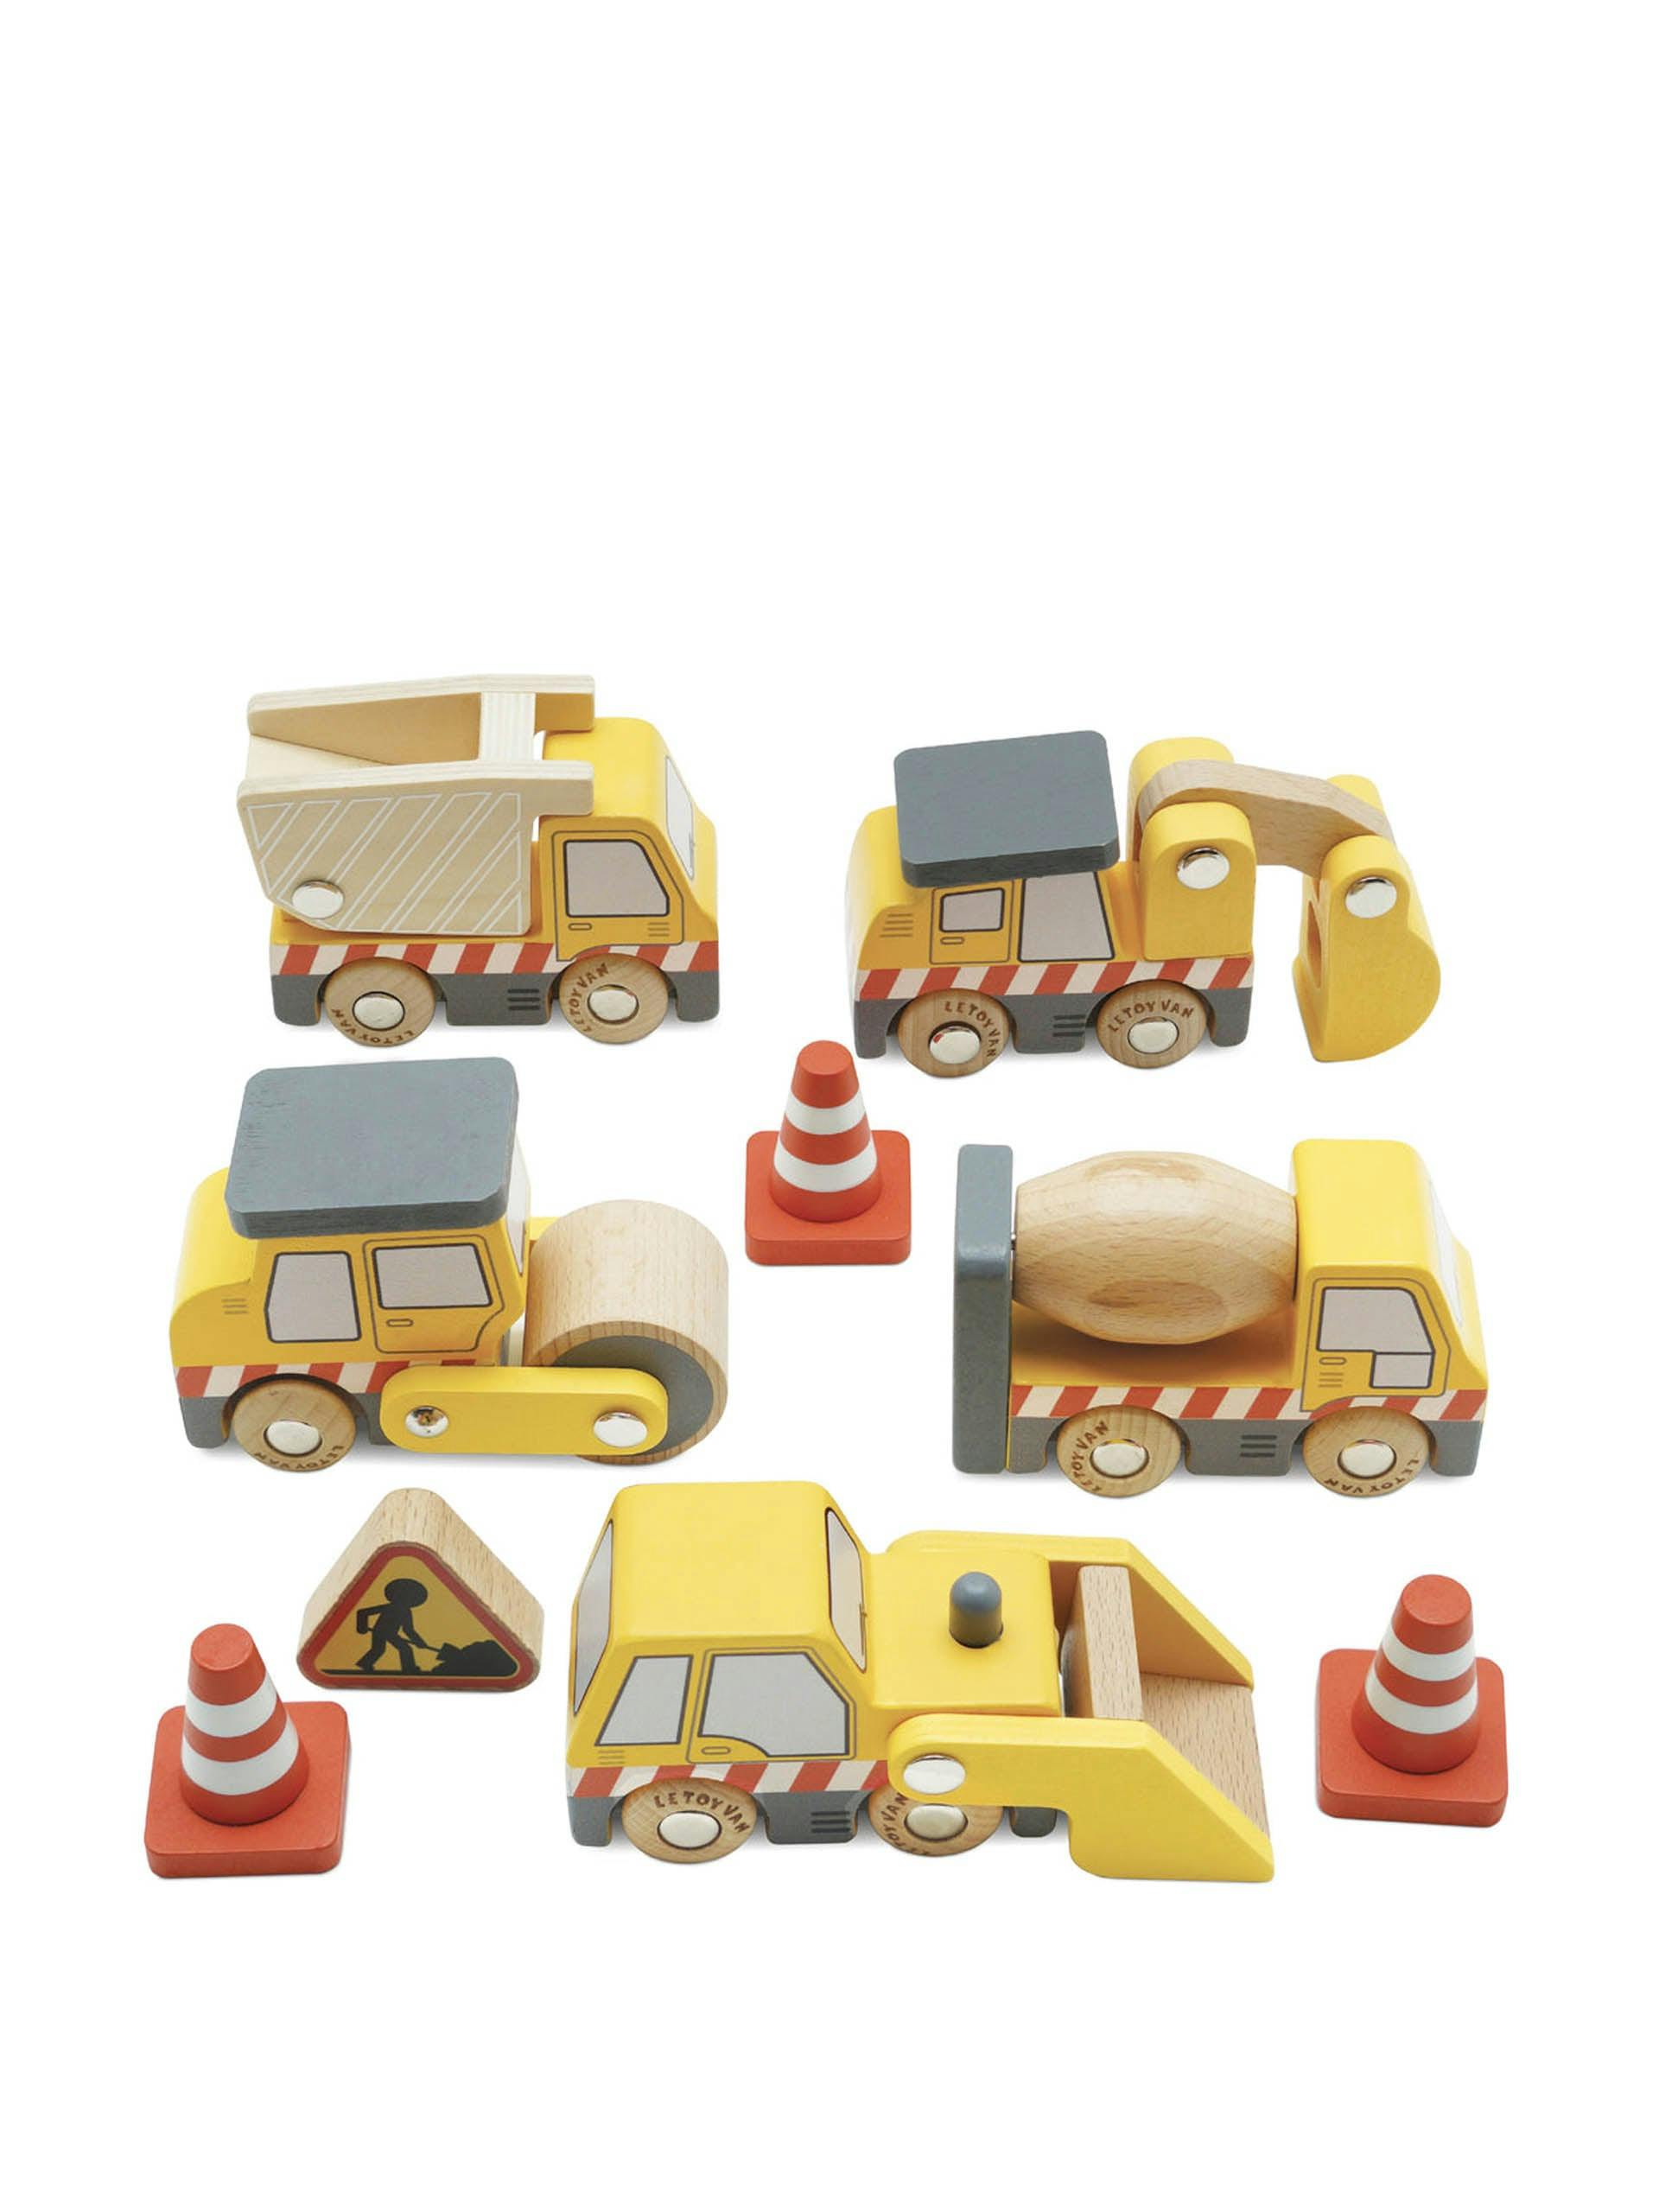 Construction cars toy